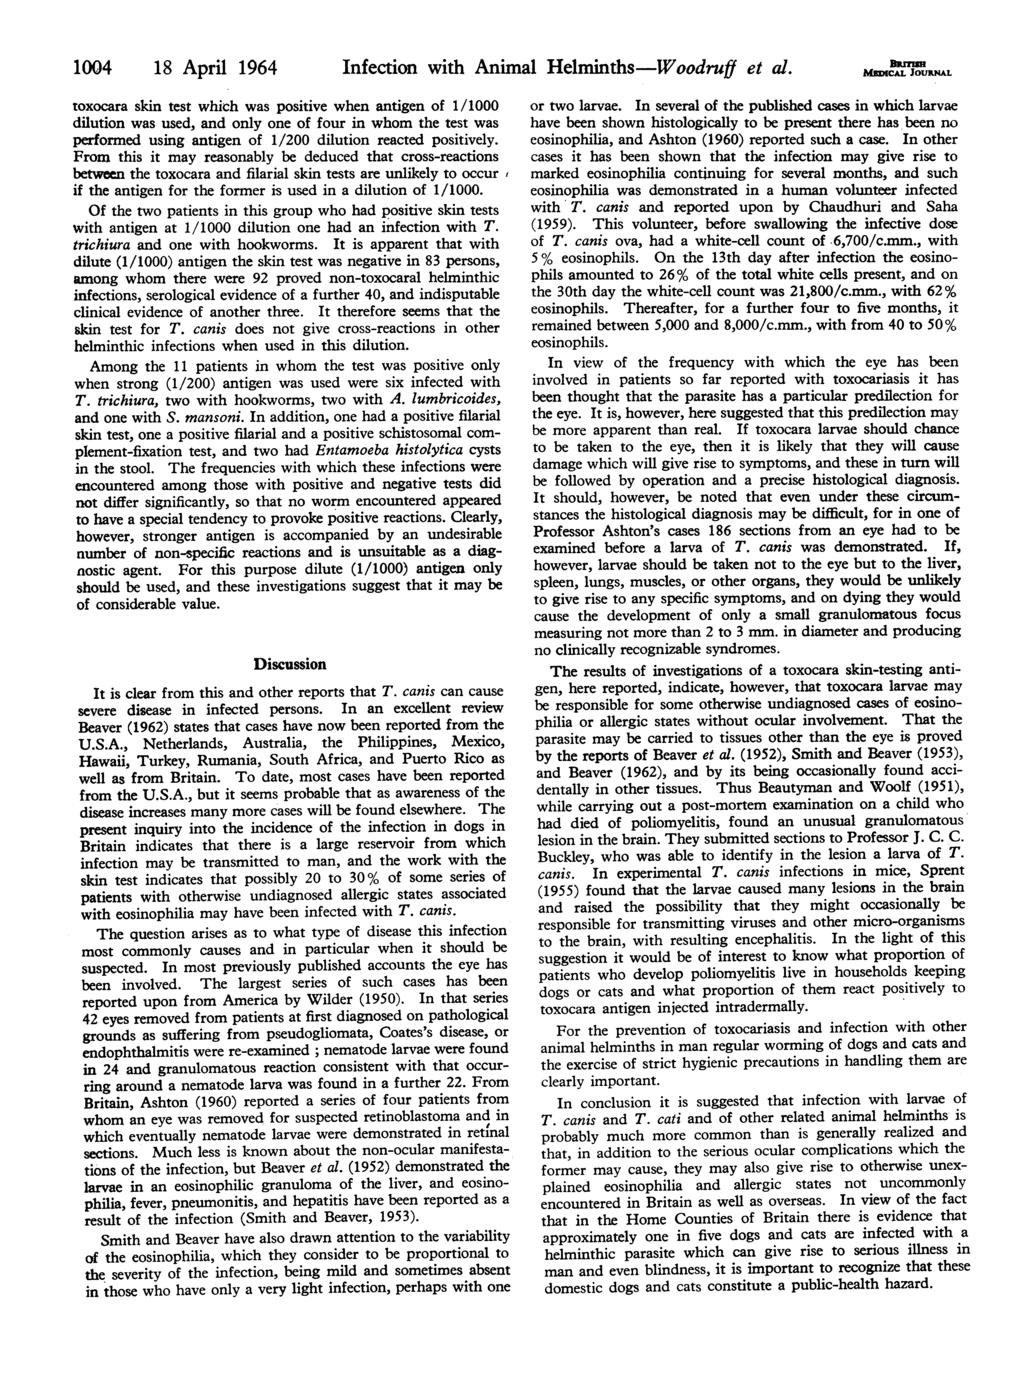 1004 18 April 1964 toxocara skin test which was positive when antigen of 1/1000 dilution was used, and only one of four in whom the test was performed using antigen of 1/00 dilution reacted